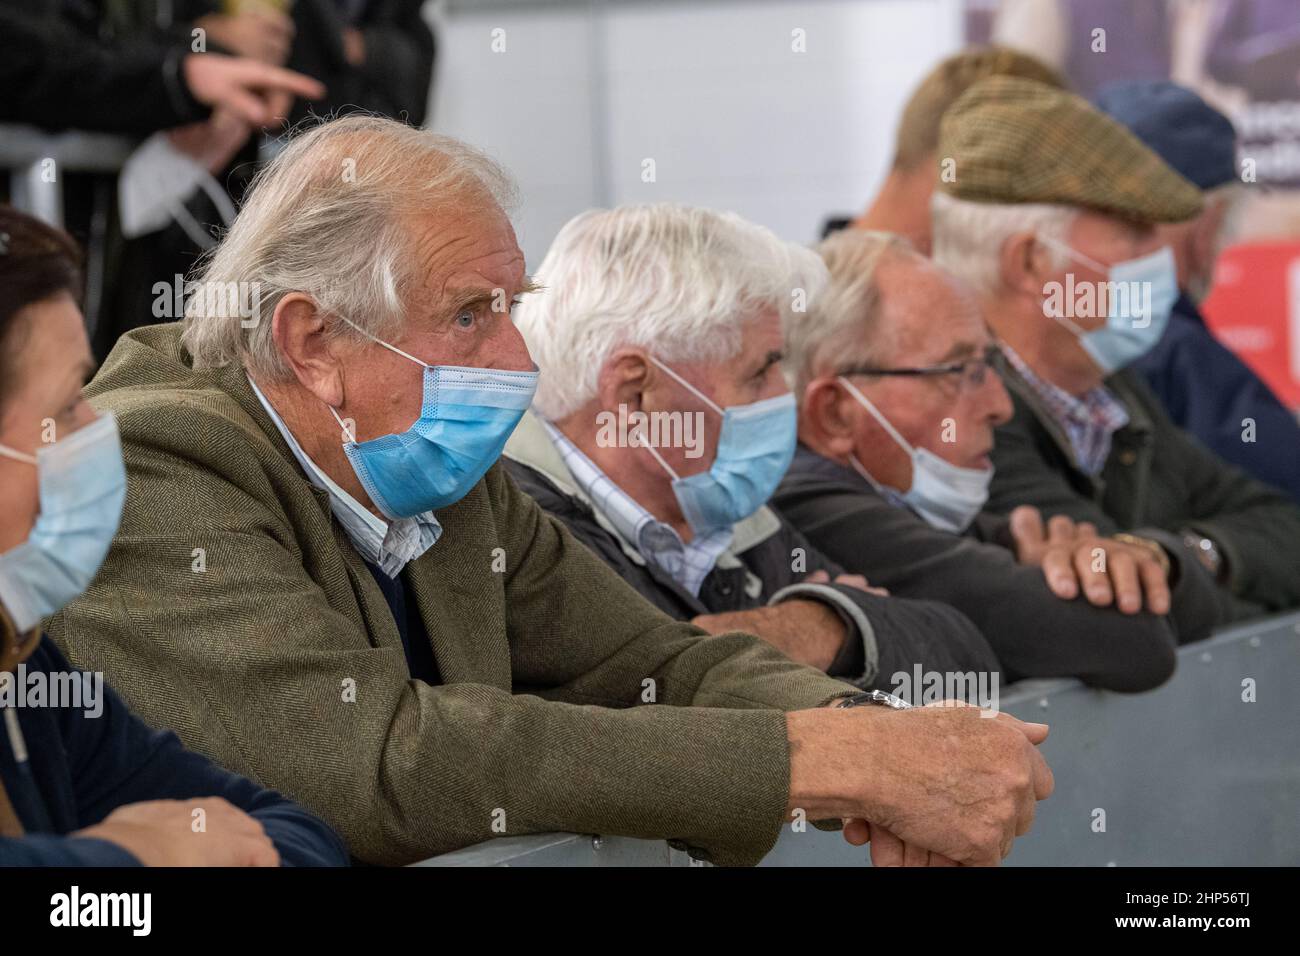 Farmers at Darlington auction mart during the Covid-19 pandemic, wearing face masks. England, UK. Stock Photo